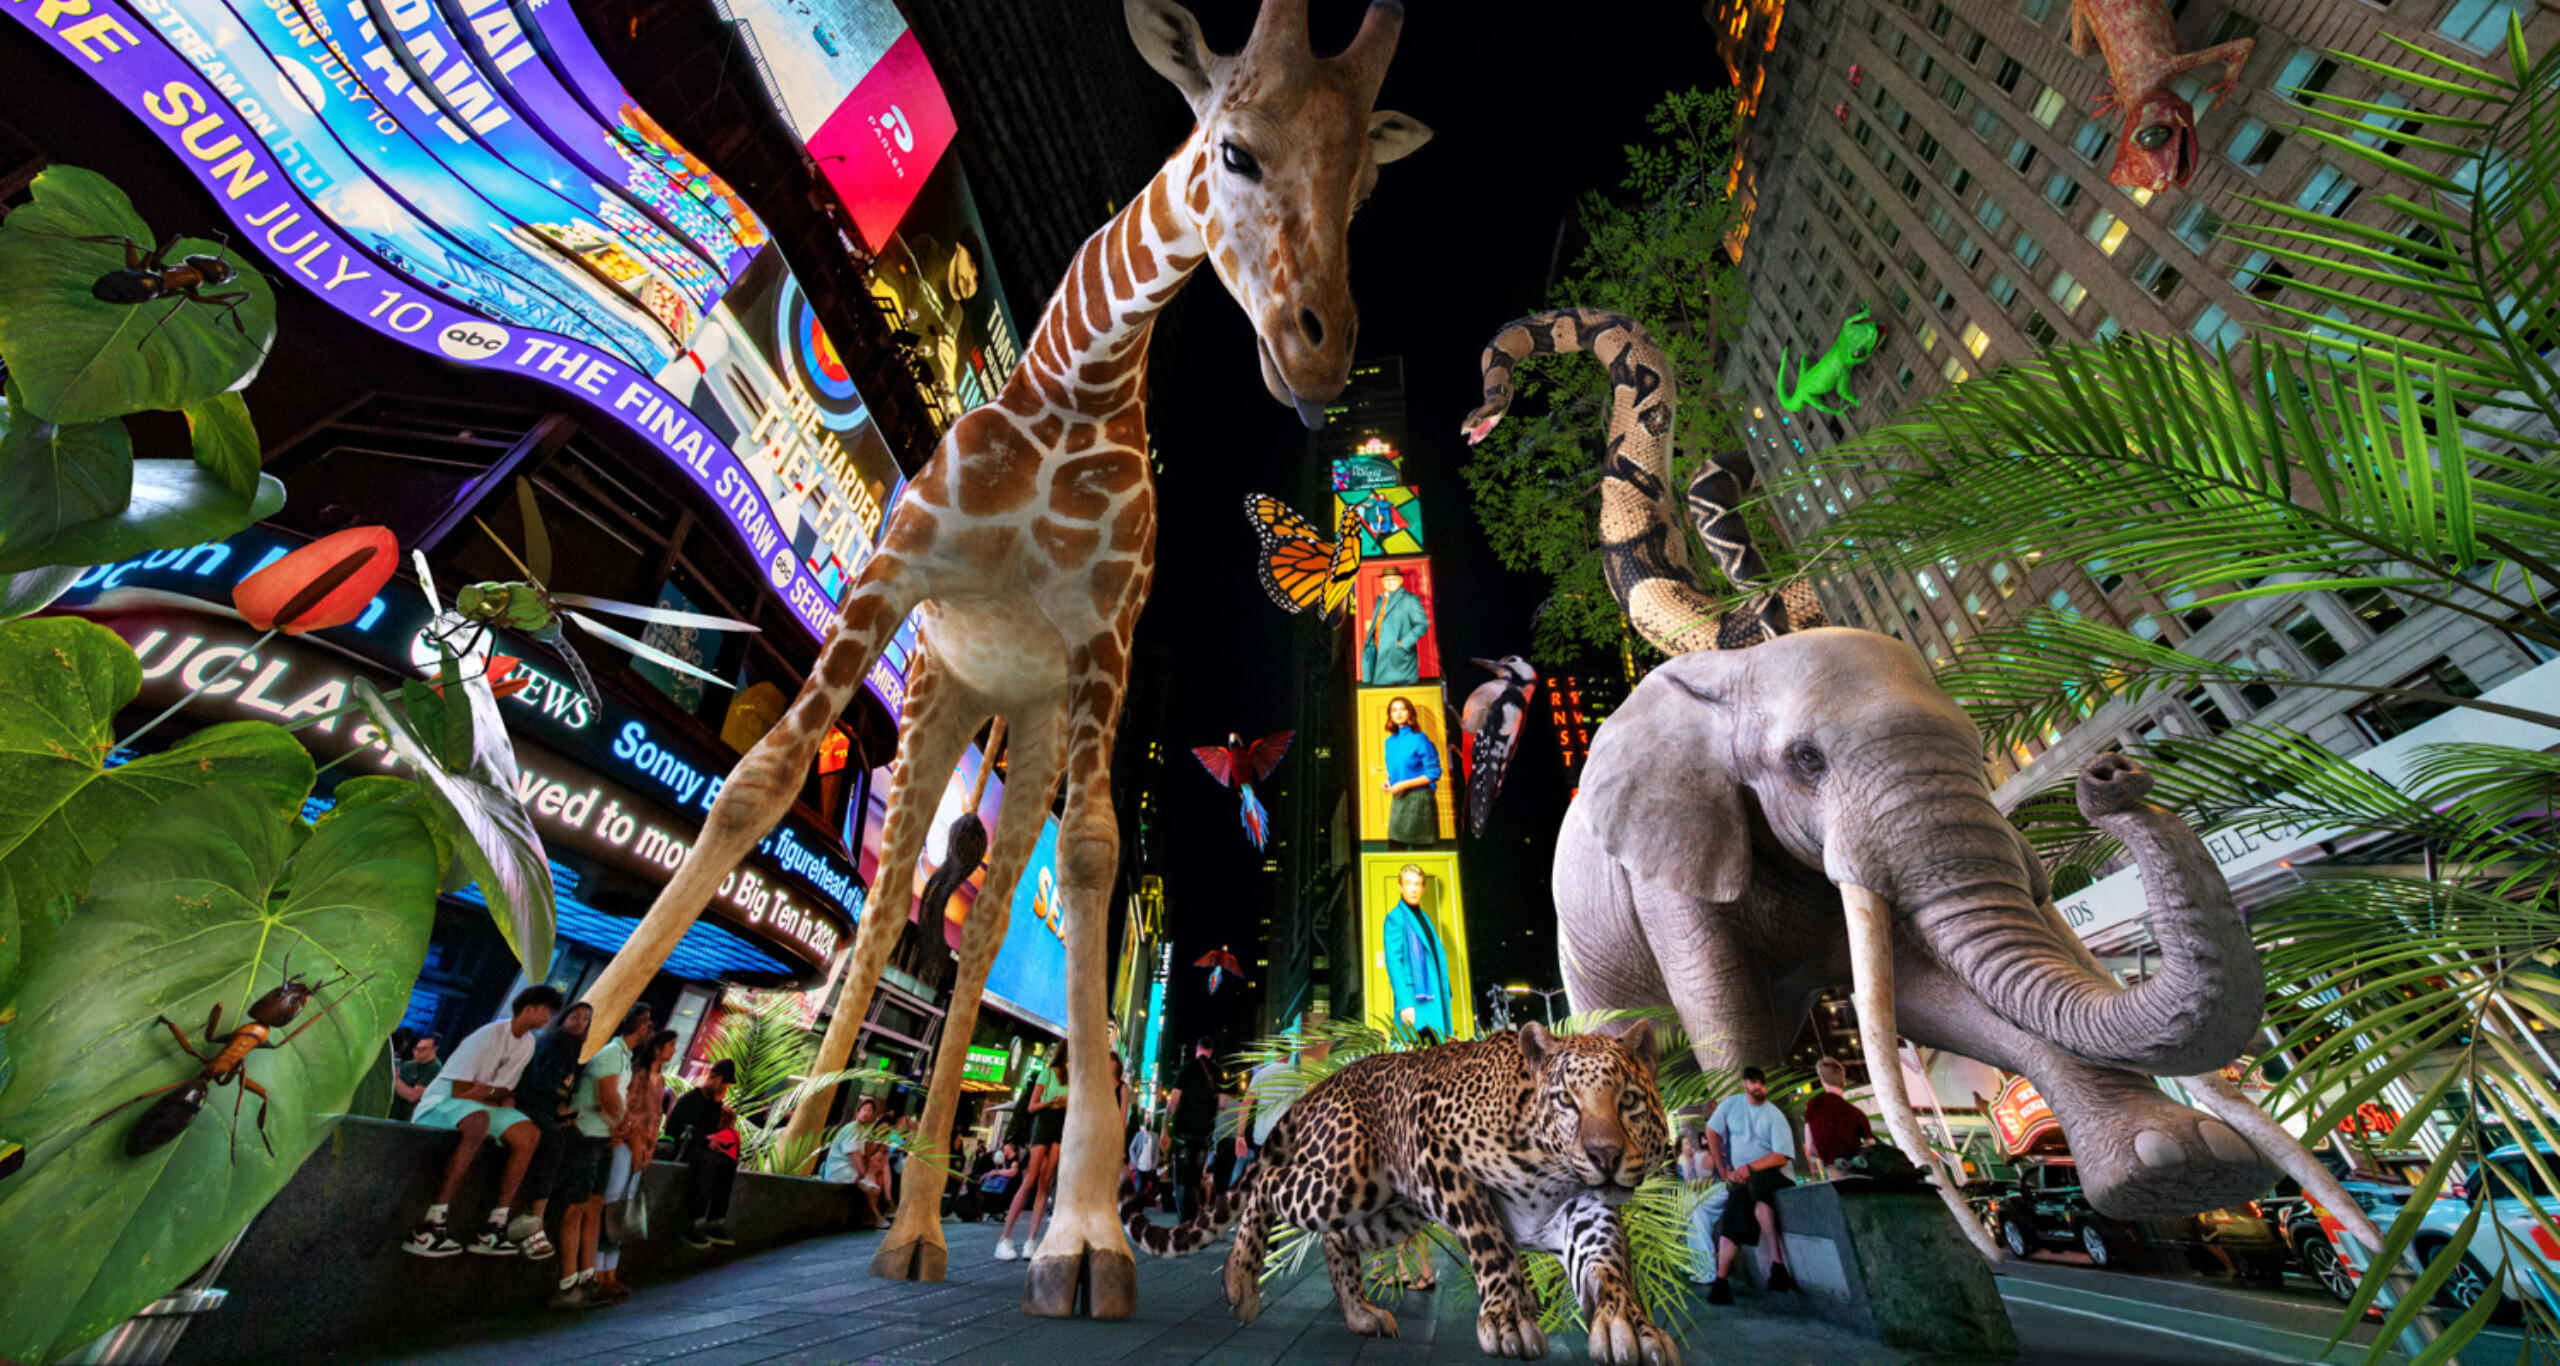 Concrete Jungle augmented reality animals in One Times Square, with live humans on the street amidst digital billboards